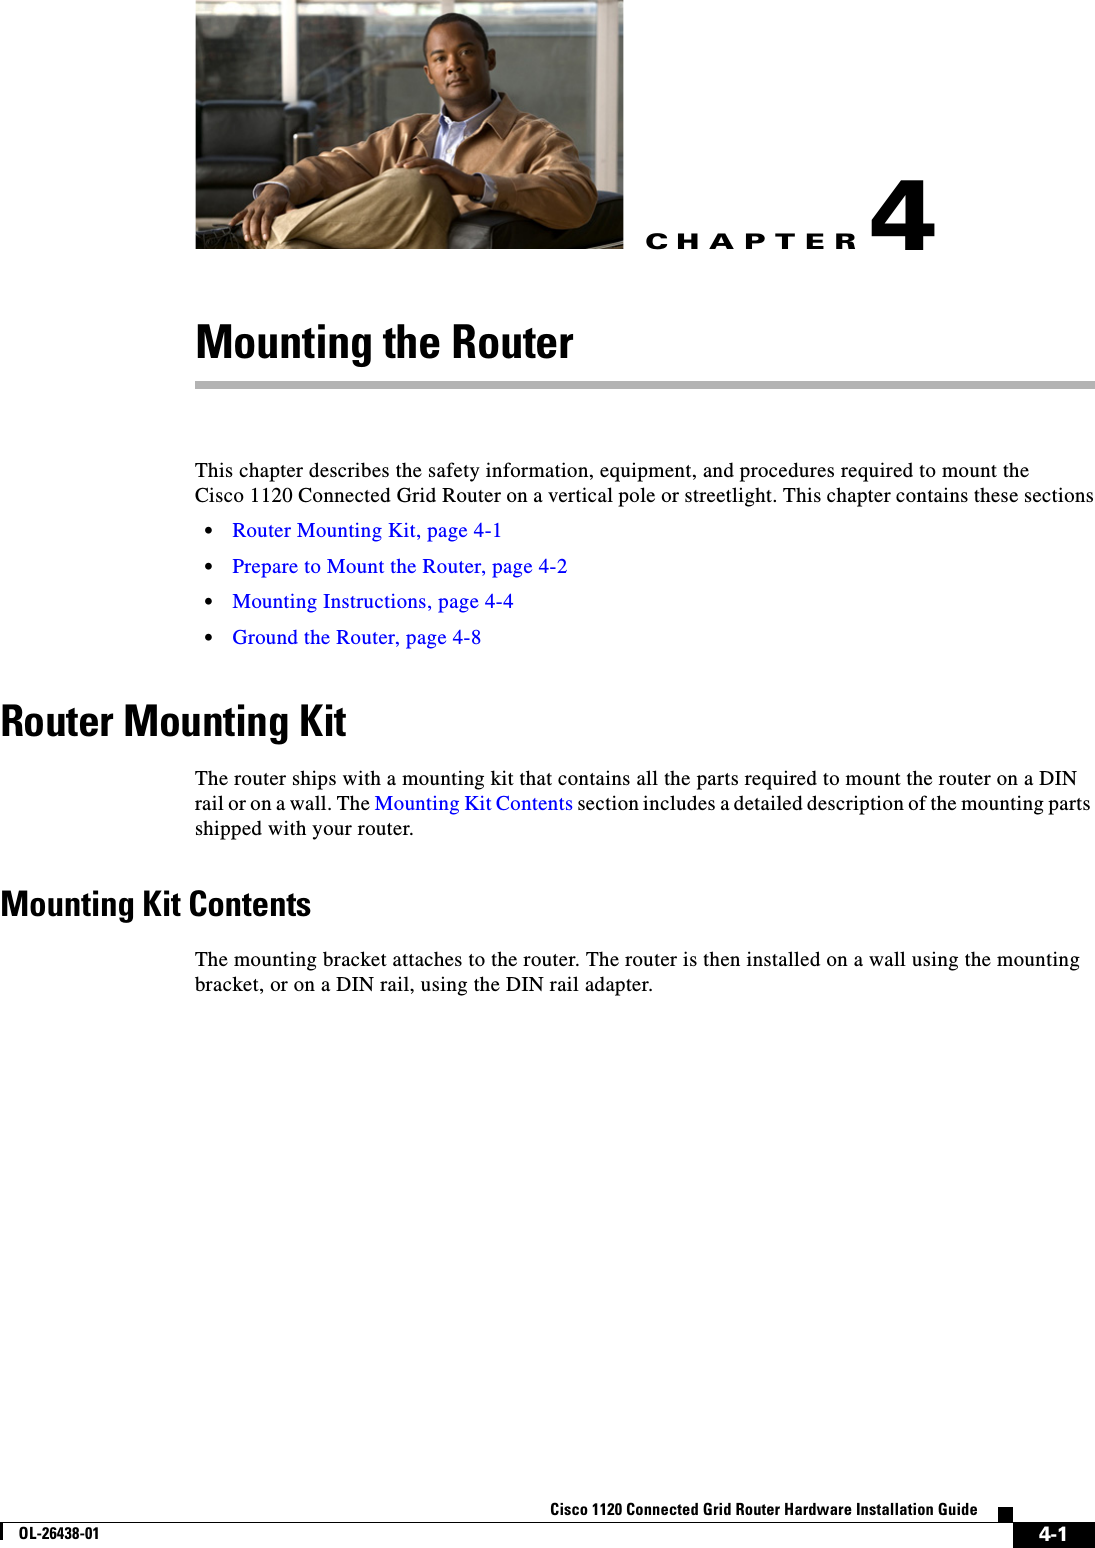 CHAPTER 4-1Cisco 1120 Connected Grid Router Hardware Installation GuideOL-26438-014Mounting the RouterThis chapter describes the safety information, equipment, and procedures required to mount the Cisco 1120 Connected Grid Router on a vertical pole or streetlight. This chapter contains these sections•Router Mounting Kit, page 4-1•Prepare to Mount the Router, page 4-2•Mounting Instructions, page 4-4•Ground the Router, page 4-8Router Mounting KitThe router ships with a mounting kit that contains all the parts required to mount the router on a DIN rail or on a wall. The Mounting Kit Contents section includes a detailed description of the mounting parts shipped with your router.Mounting Kit ContentsThe mounting bracket attaches to the router. The router is then installed on a wall using the mounting bracket, or on a DIN rail, using the DIN rail adapter.